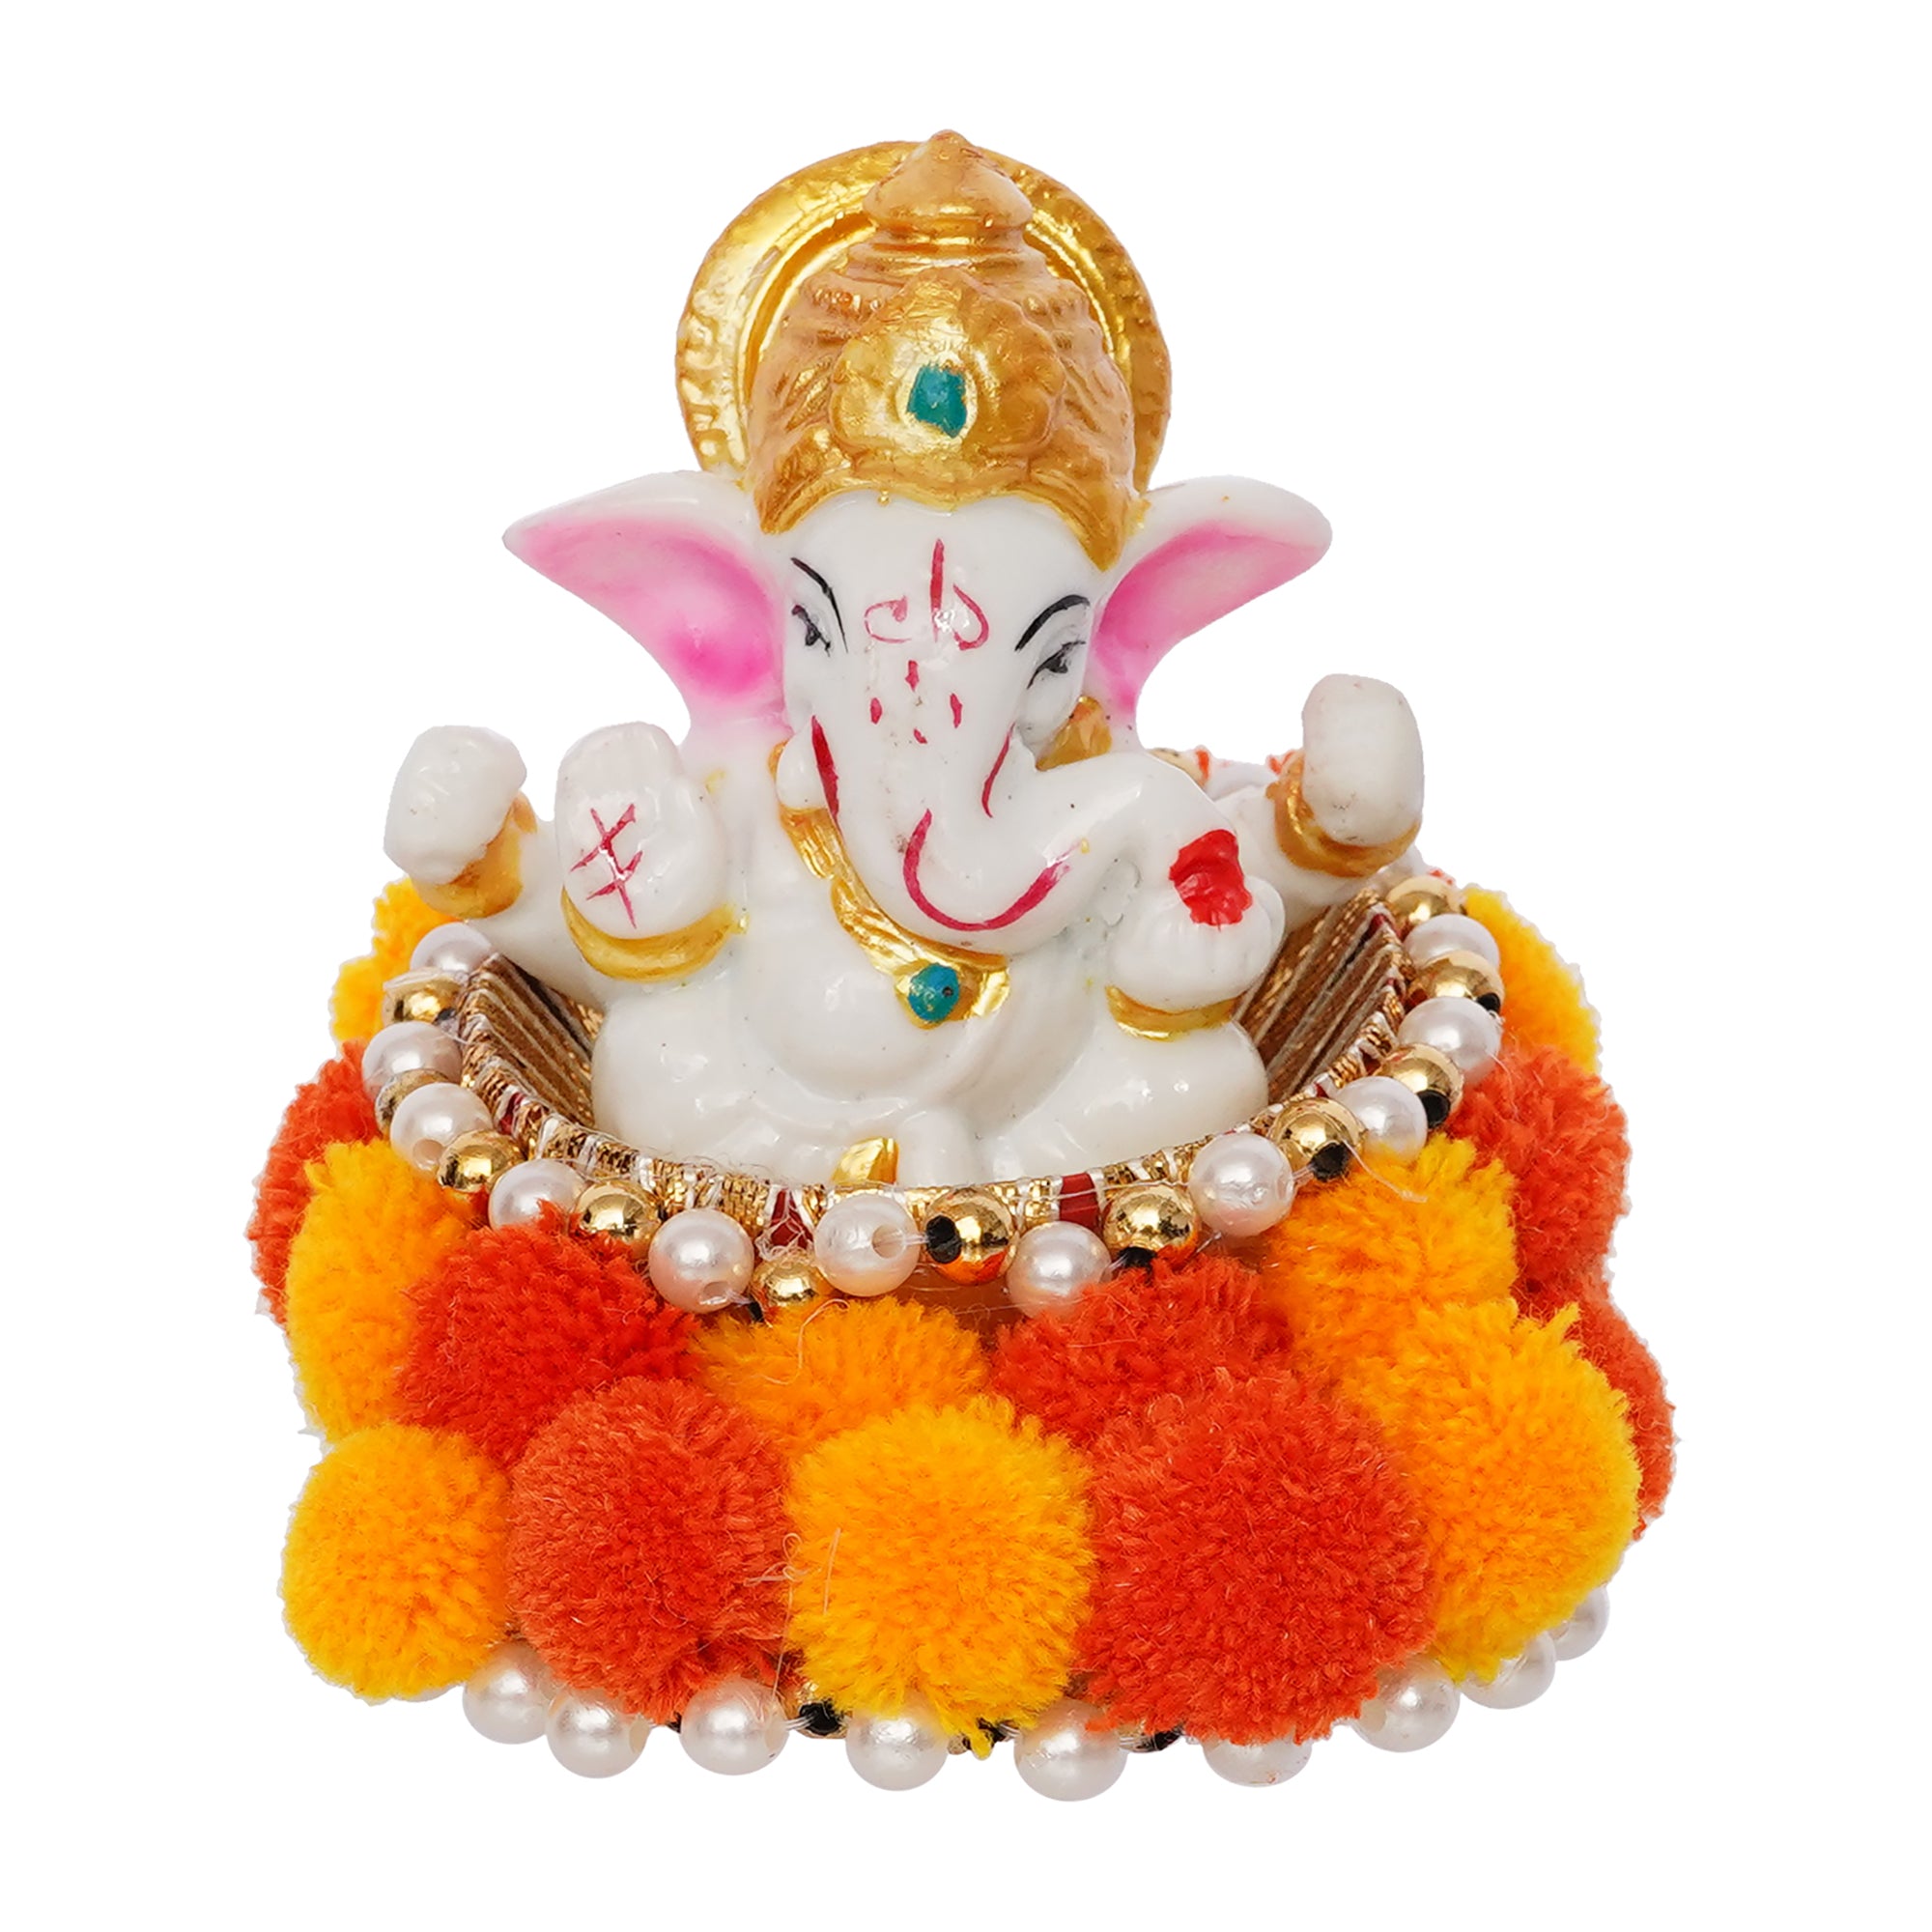 Polyresin Lord Ganesha Idol on Decorative Handcrafted Floral Plate for Home and Car Dashboard 4